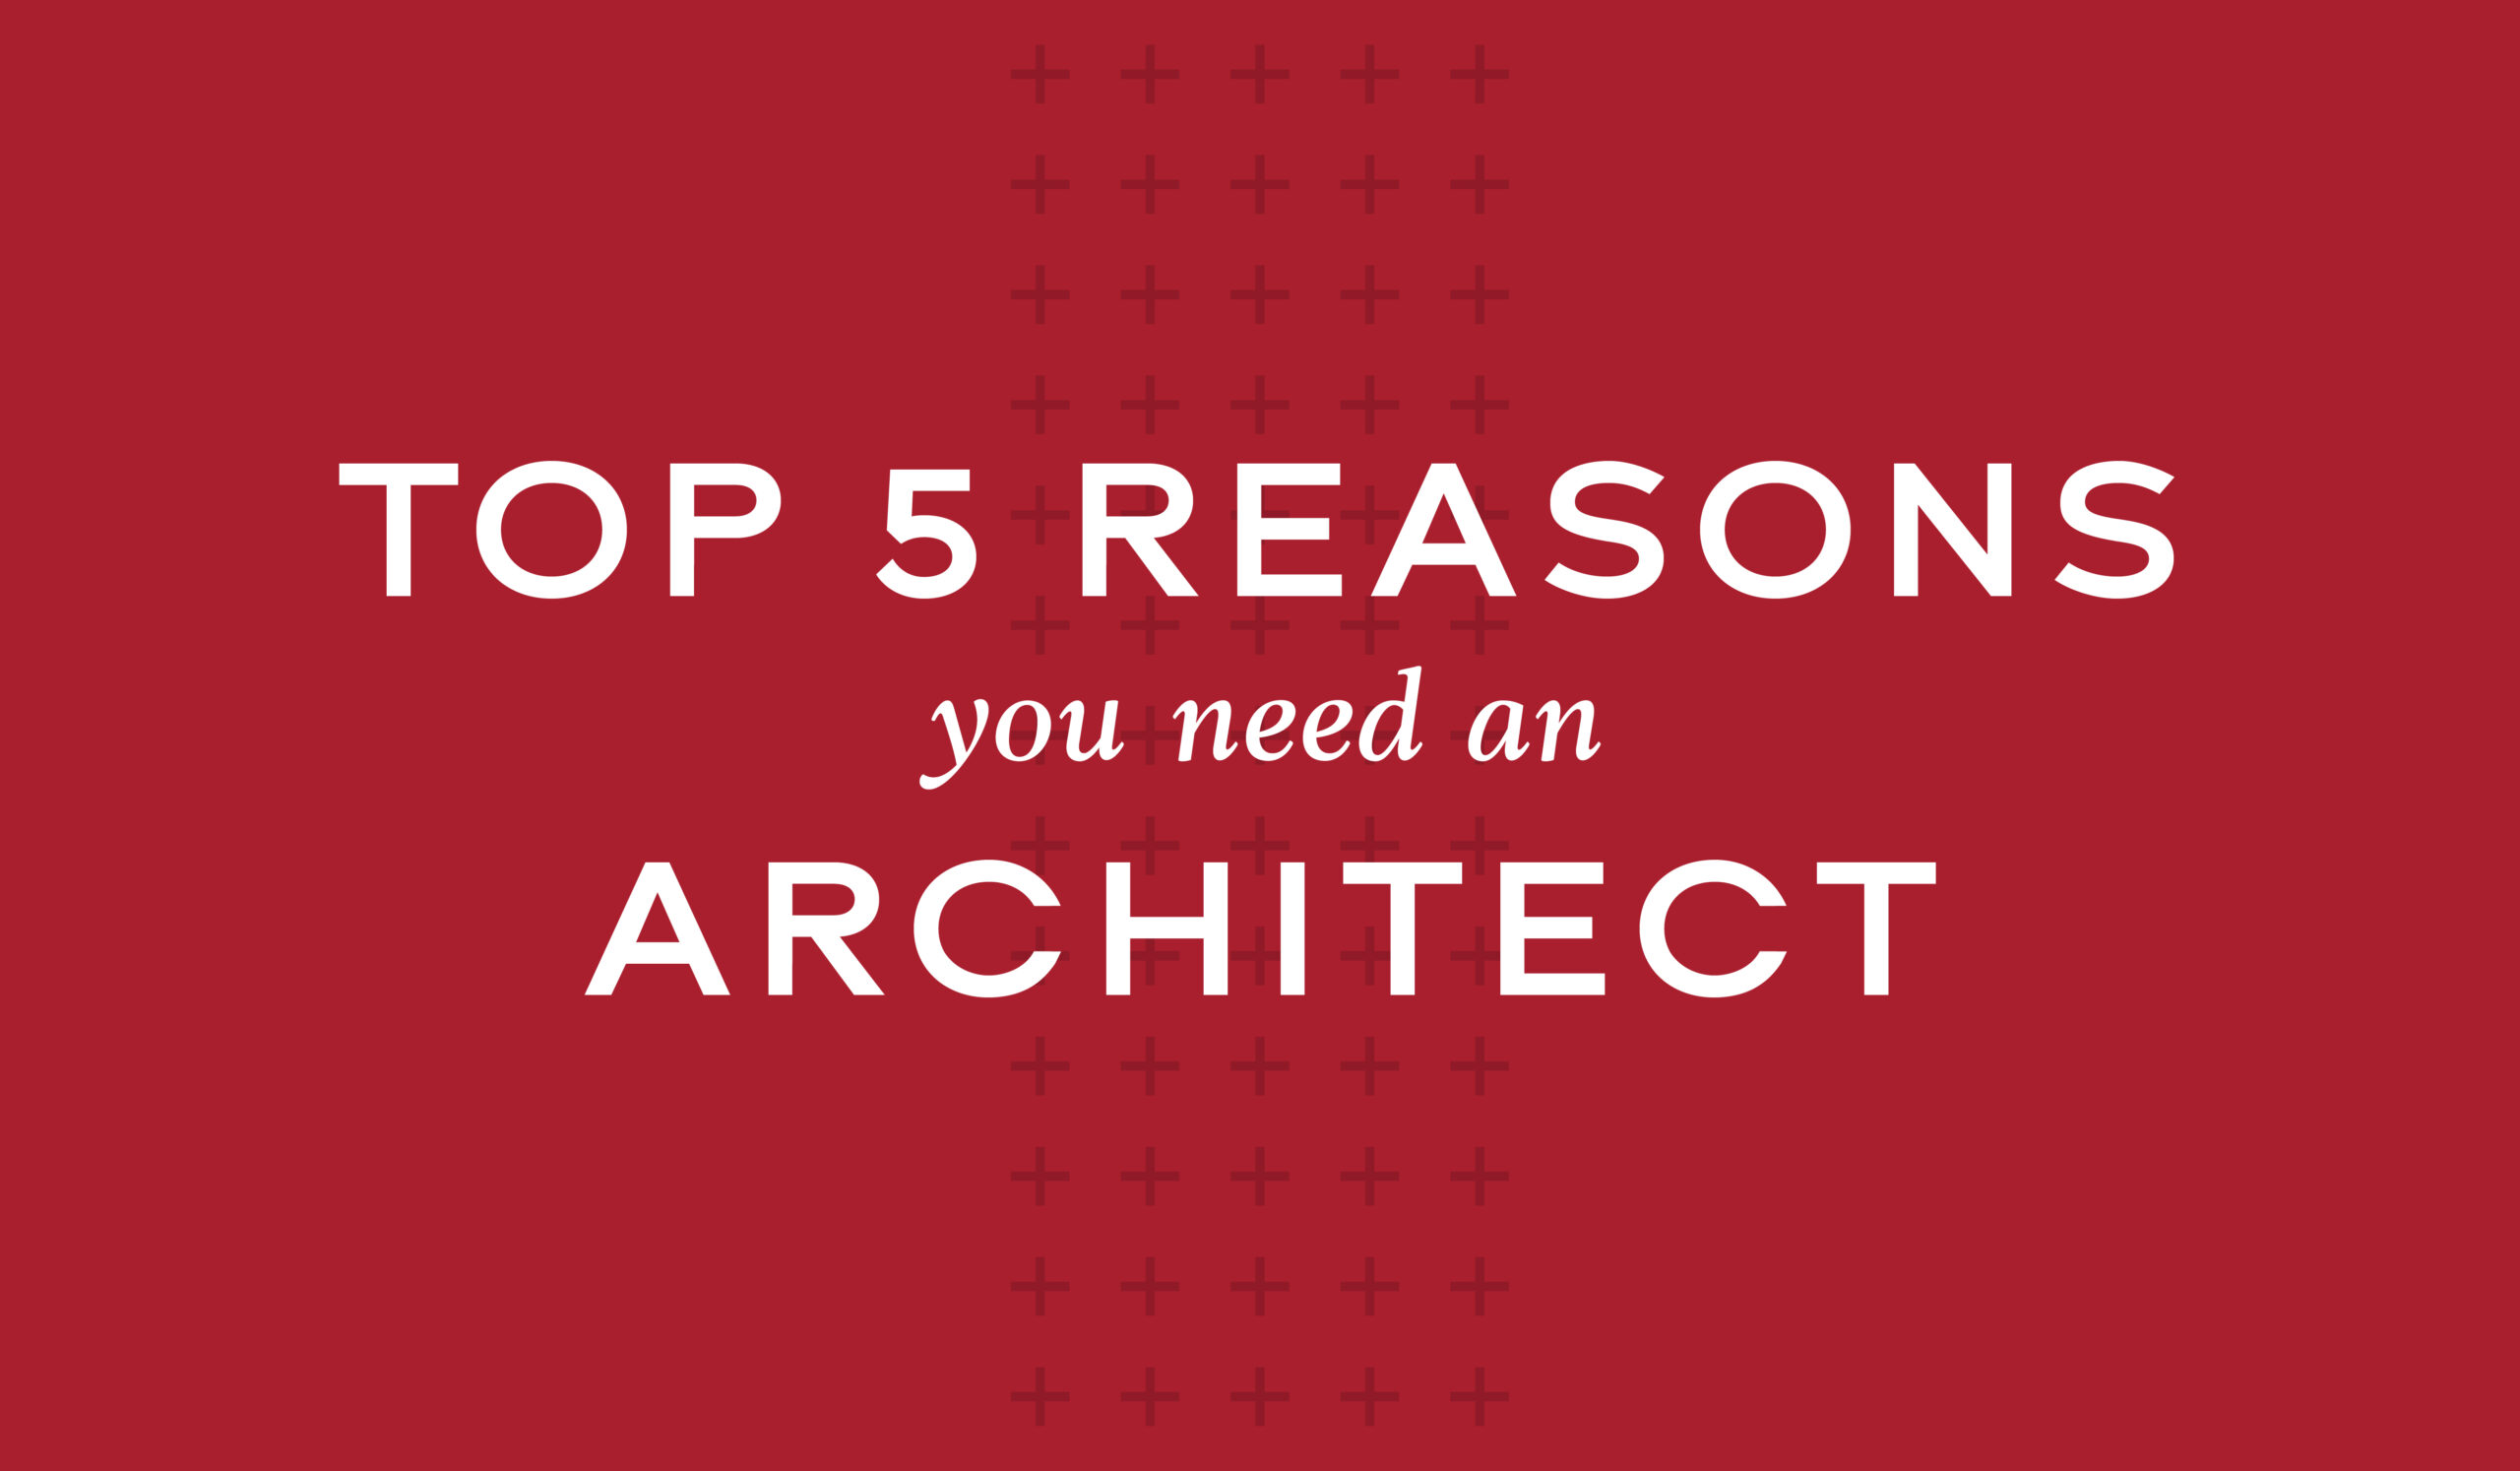 Why you need an Architect